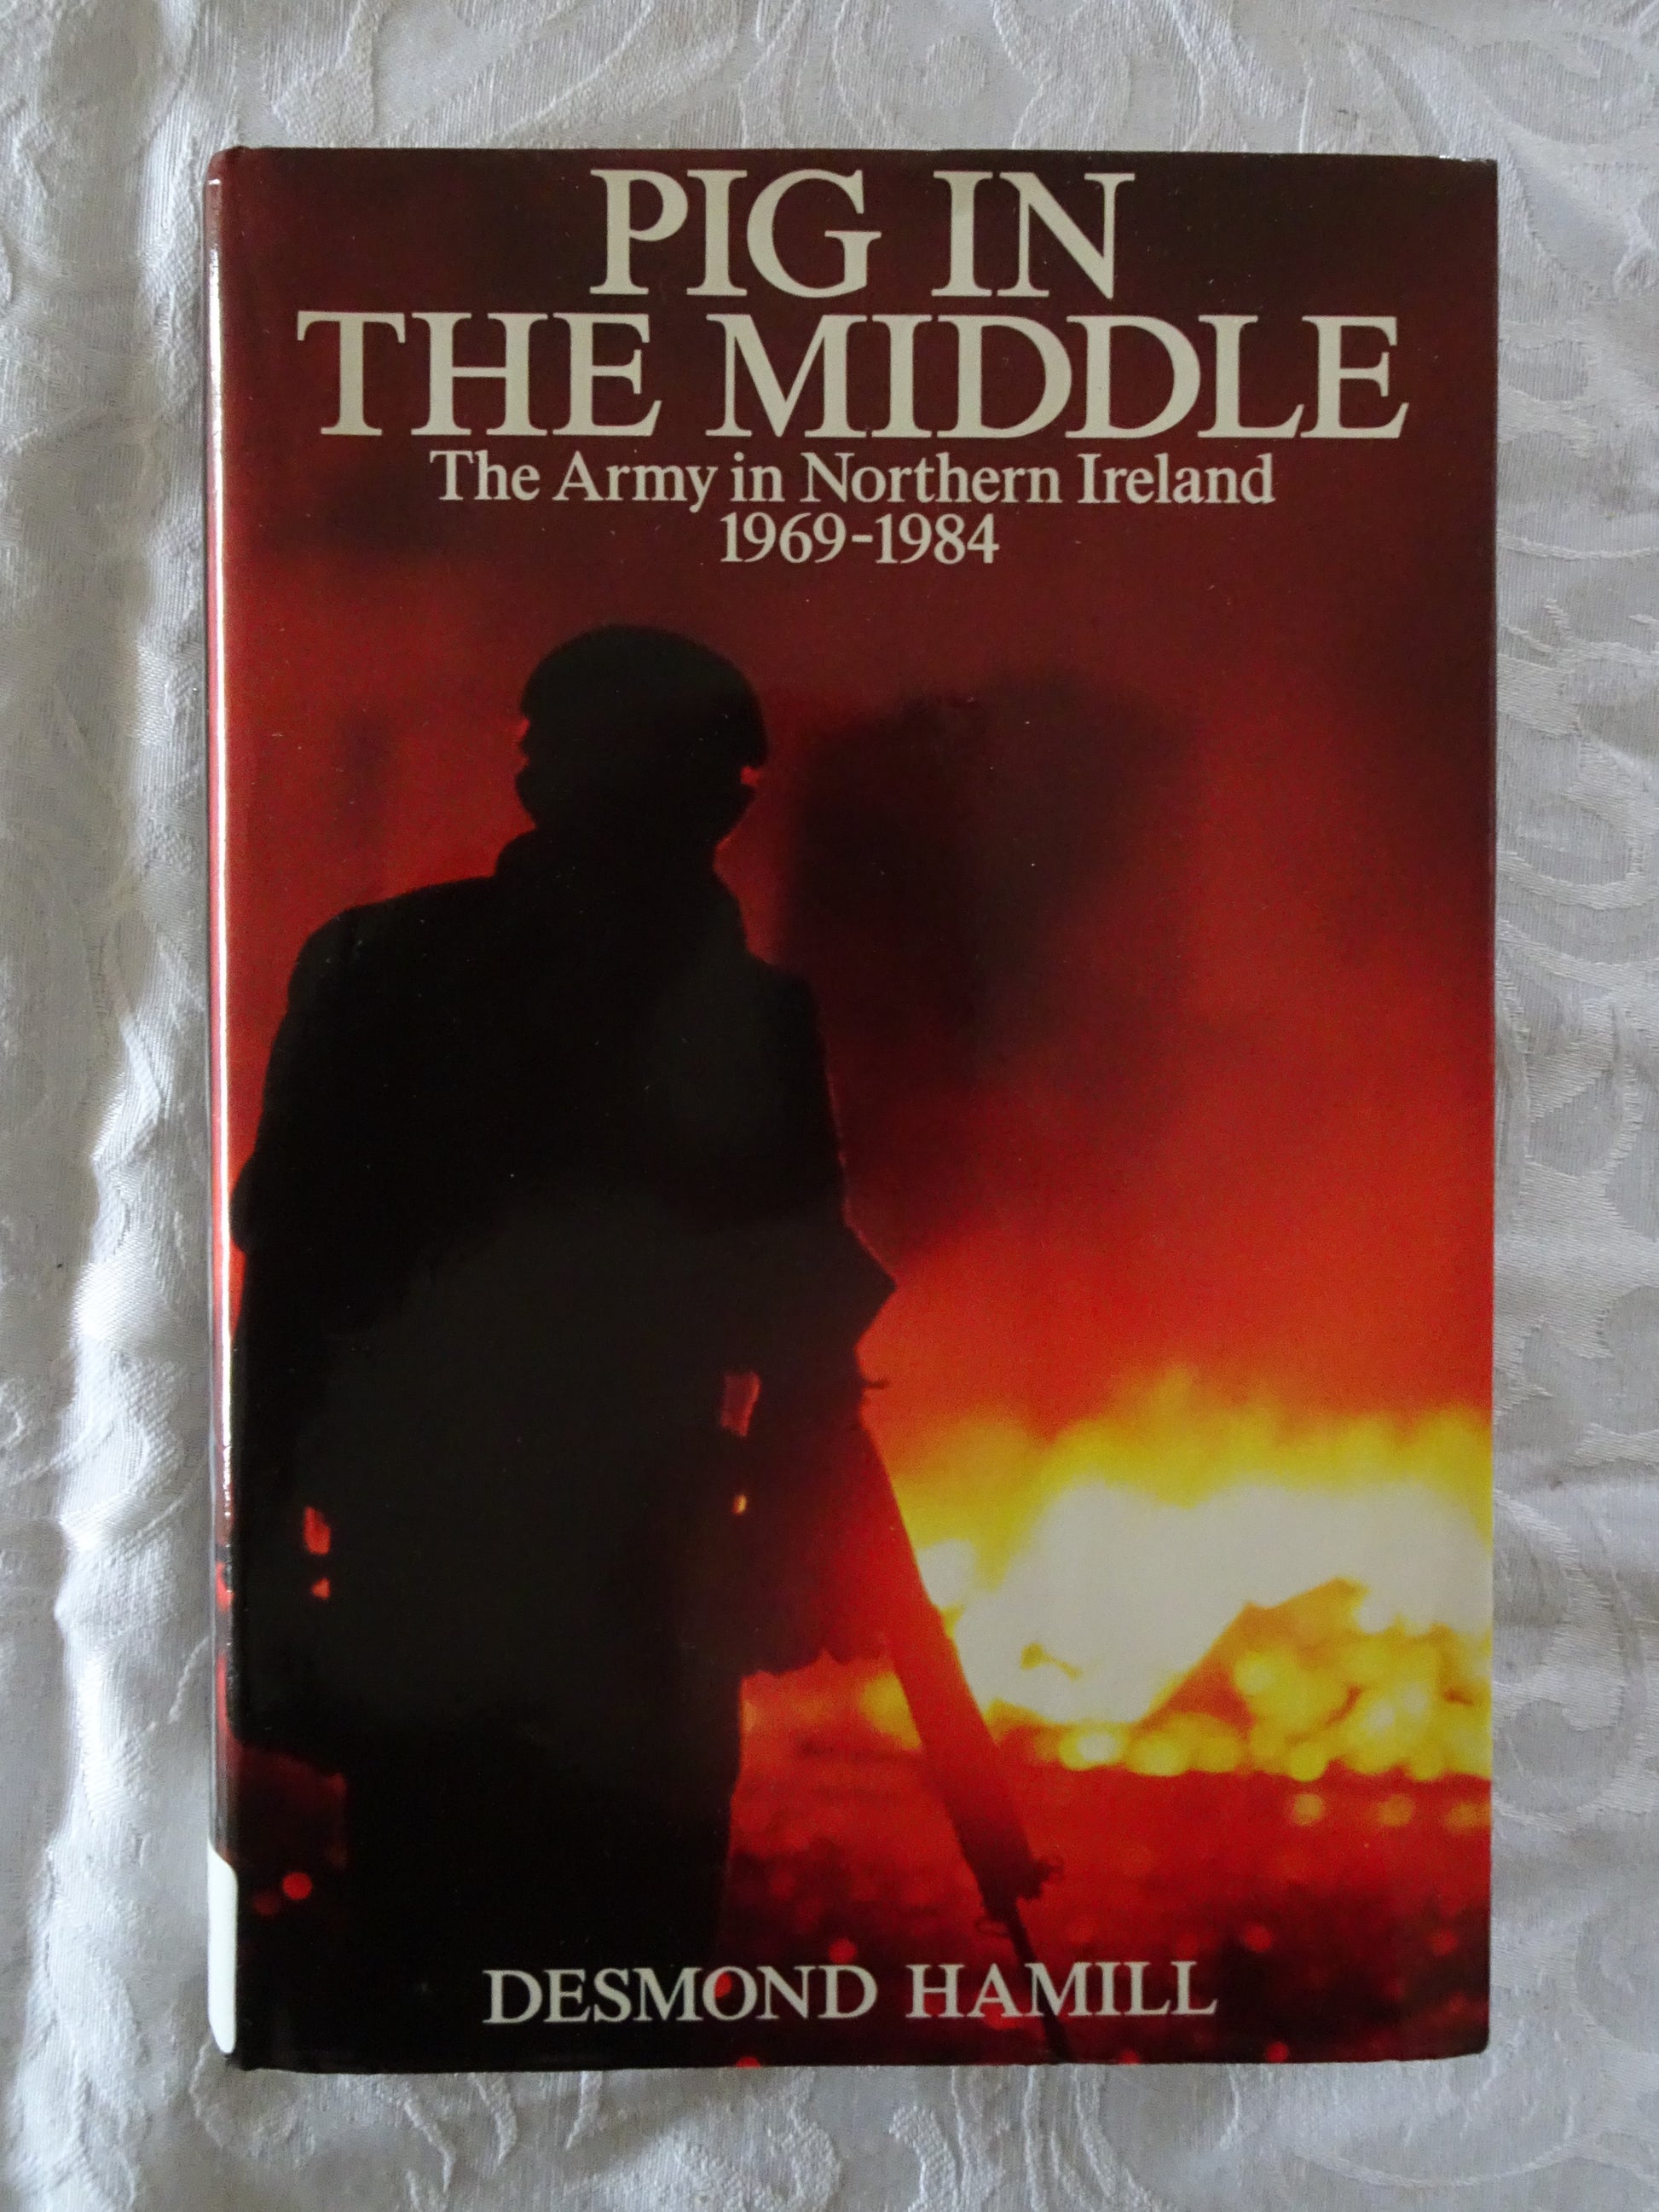 Pig in the Middle  The Army in Northern Ireland 1969-1984  by Desmond Hamill